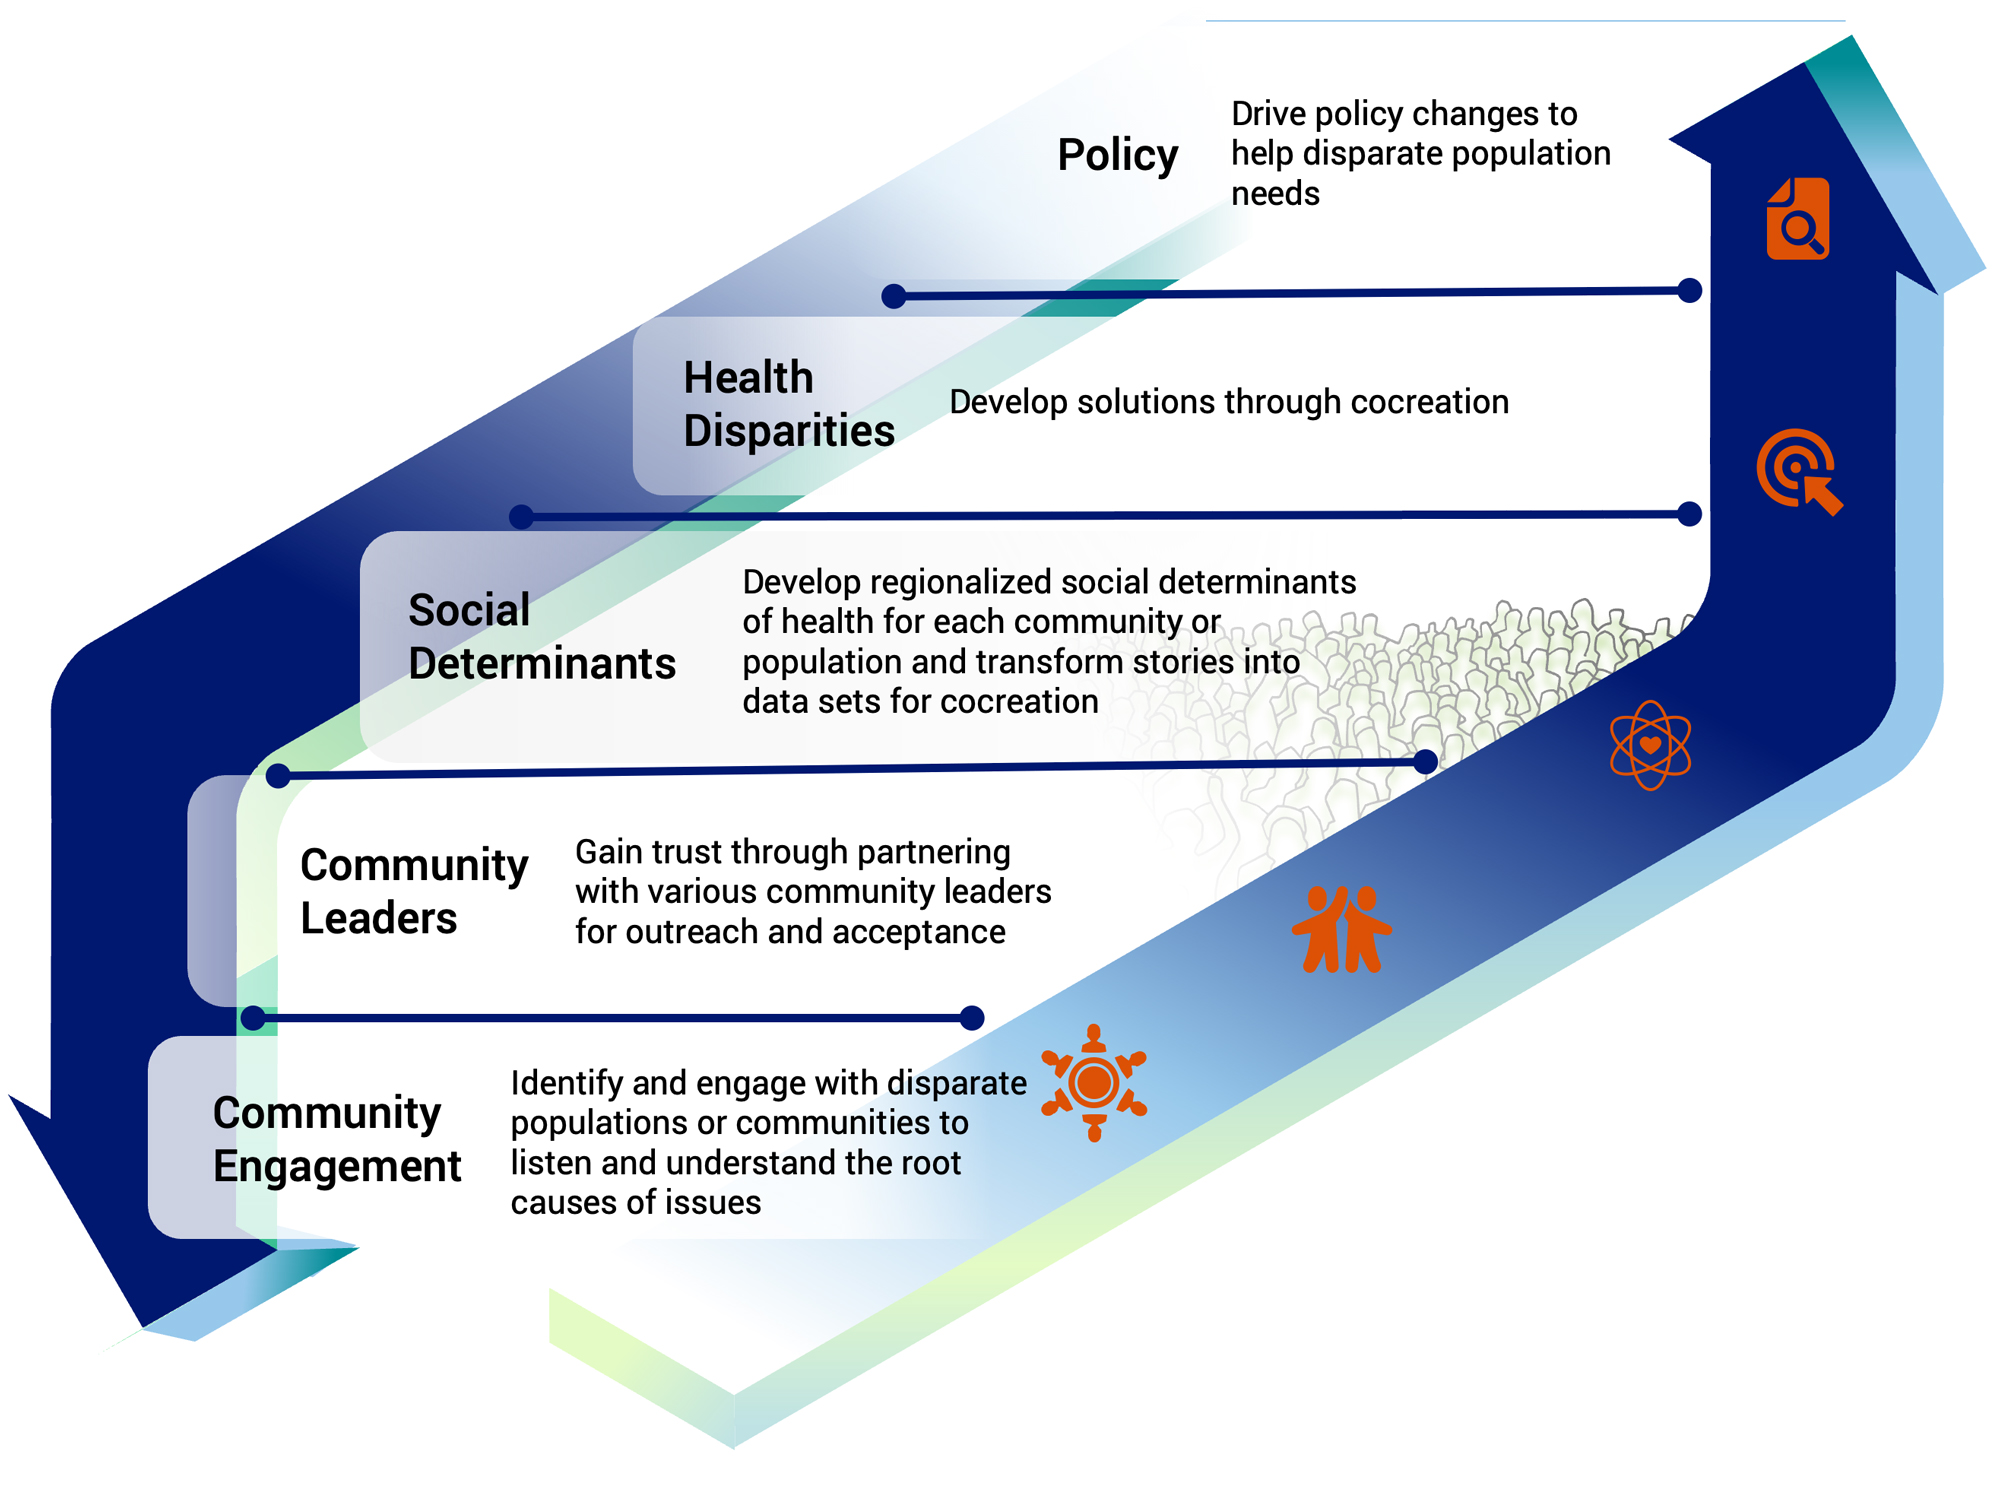 This infographic depicts the ongoing cycle of how to improve health equity though community engagement, gaining trust with community leaders, development of social determinants and health disparities, and driving policy changes.